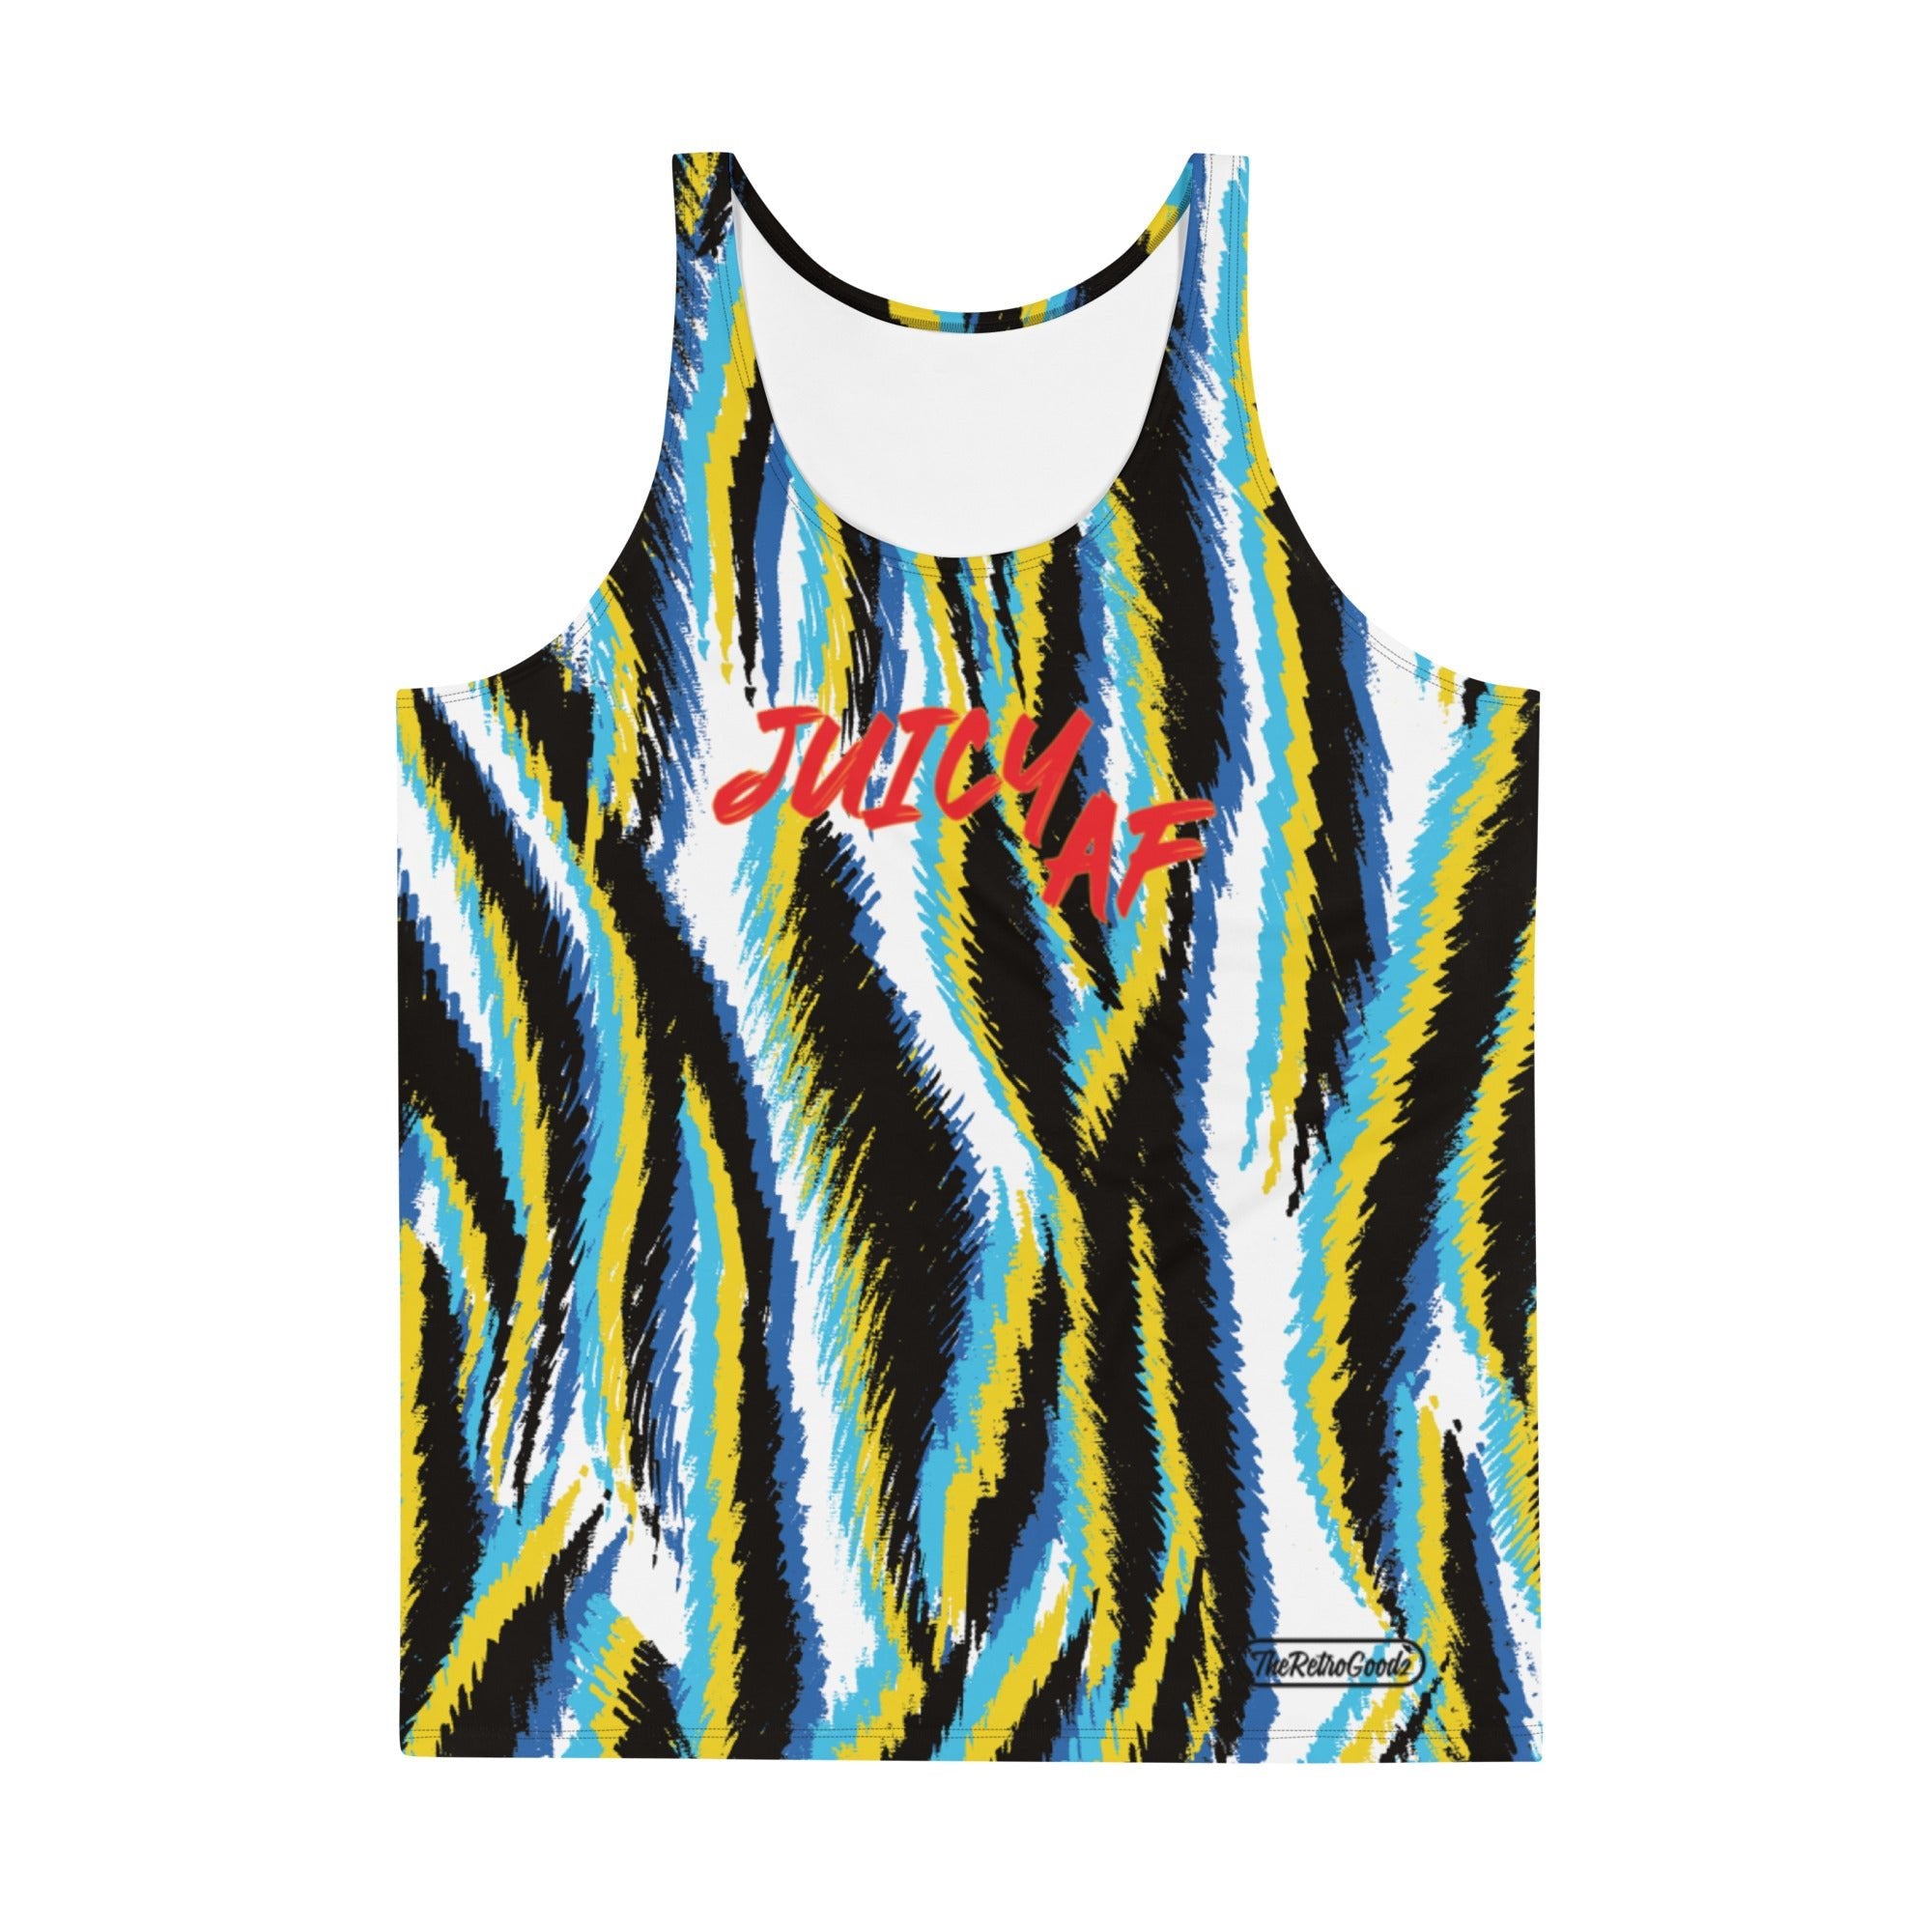 Juicy Af Striped vibes - Krazy Muscle Nutrition Krazy Muscle Nutrition9093490_9049